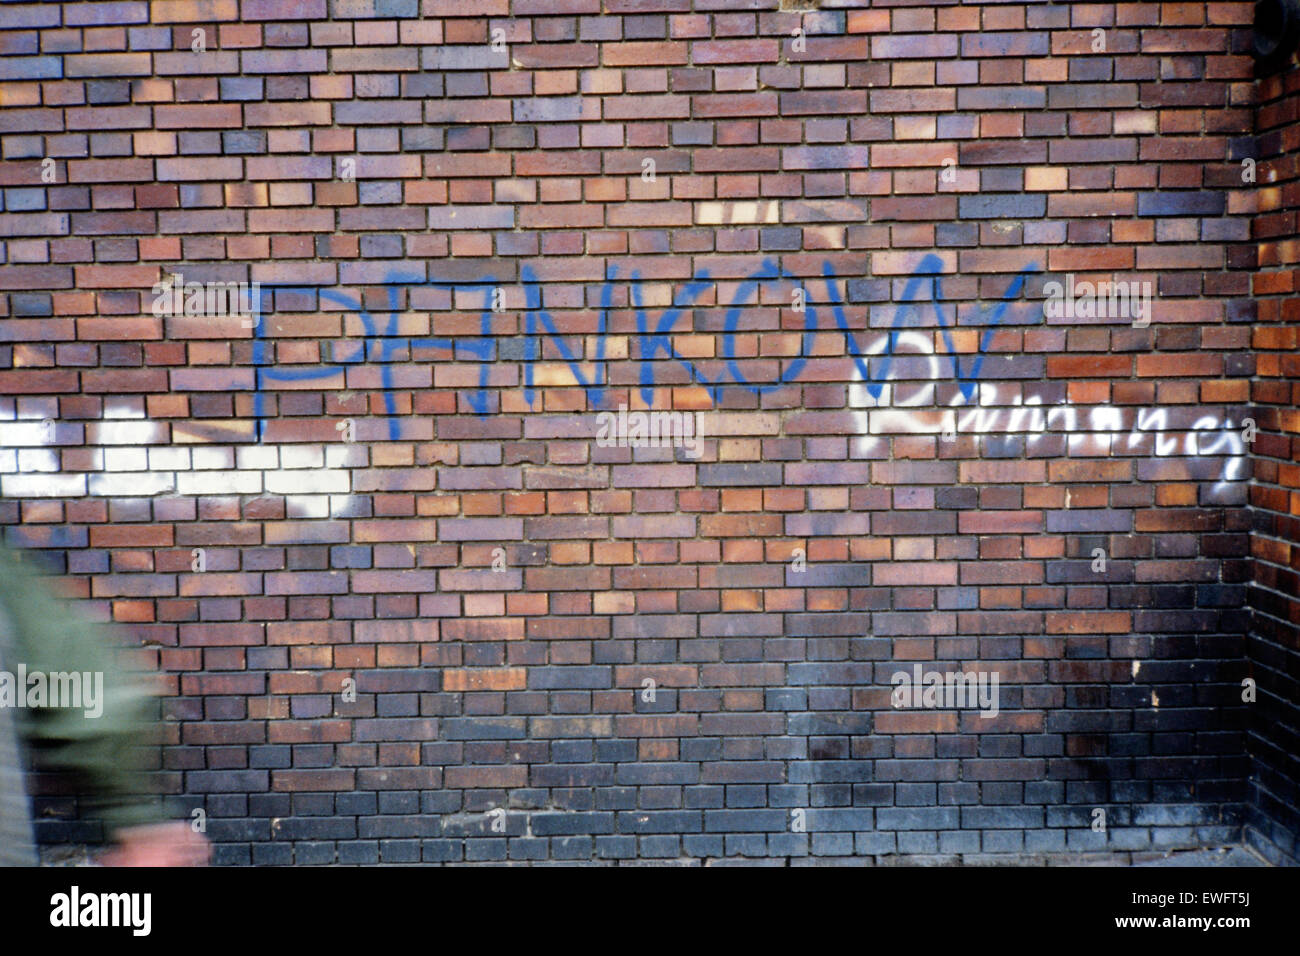 Berlin, East Germany, lettering Pankow and Ramones at a house wall Stock Photo